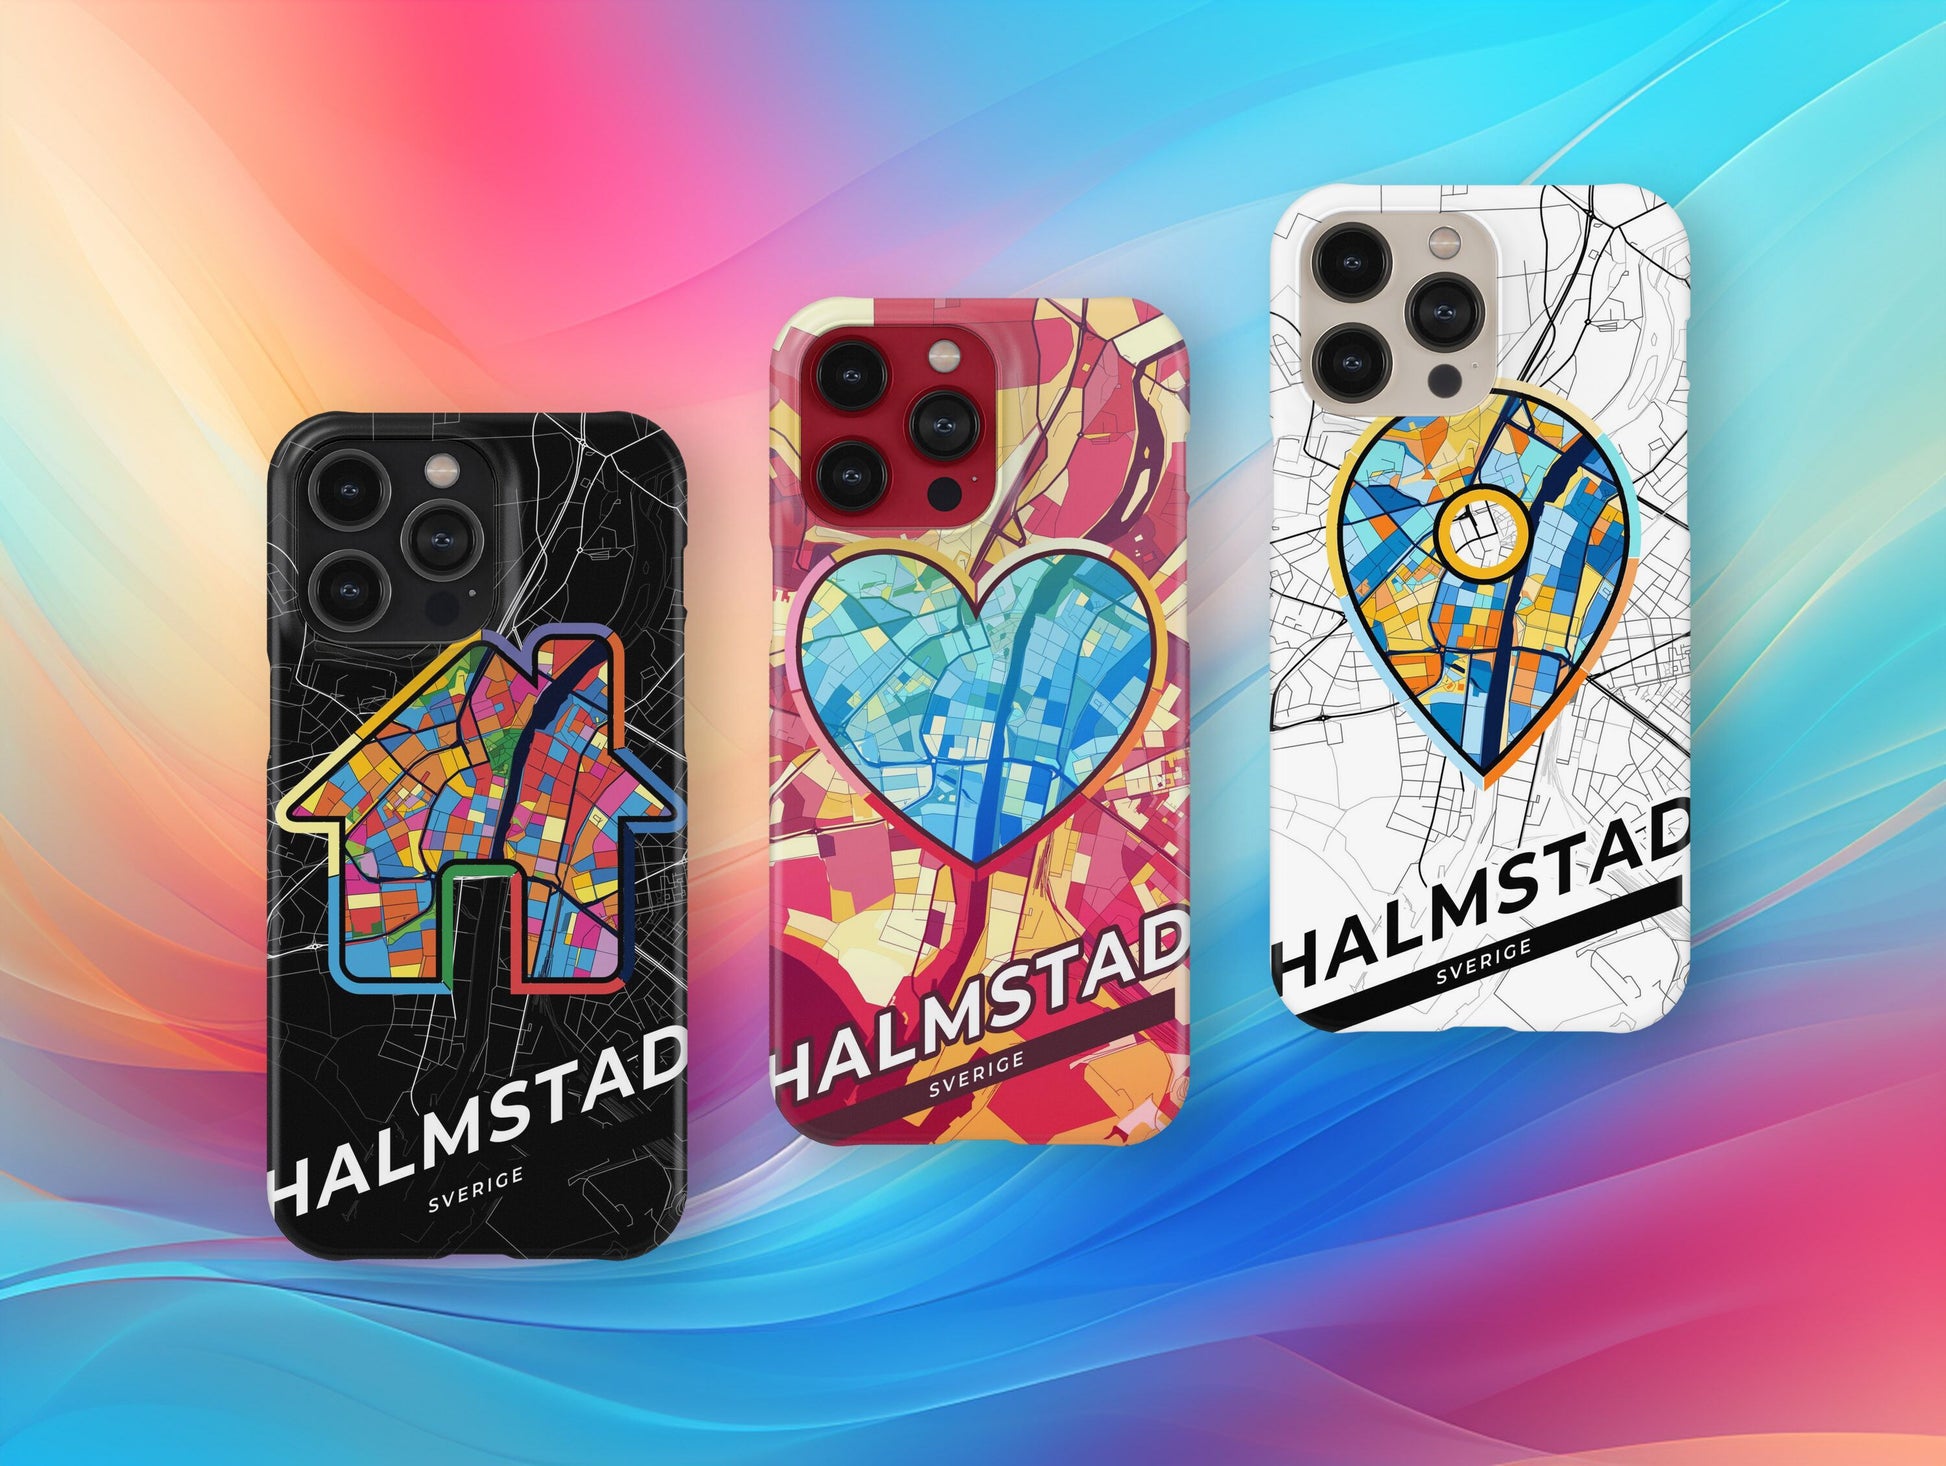 Halmstad Sweden slim phone case with colorful icon. Birthday, wedding or housewarming gift. Couple match cases.